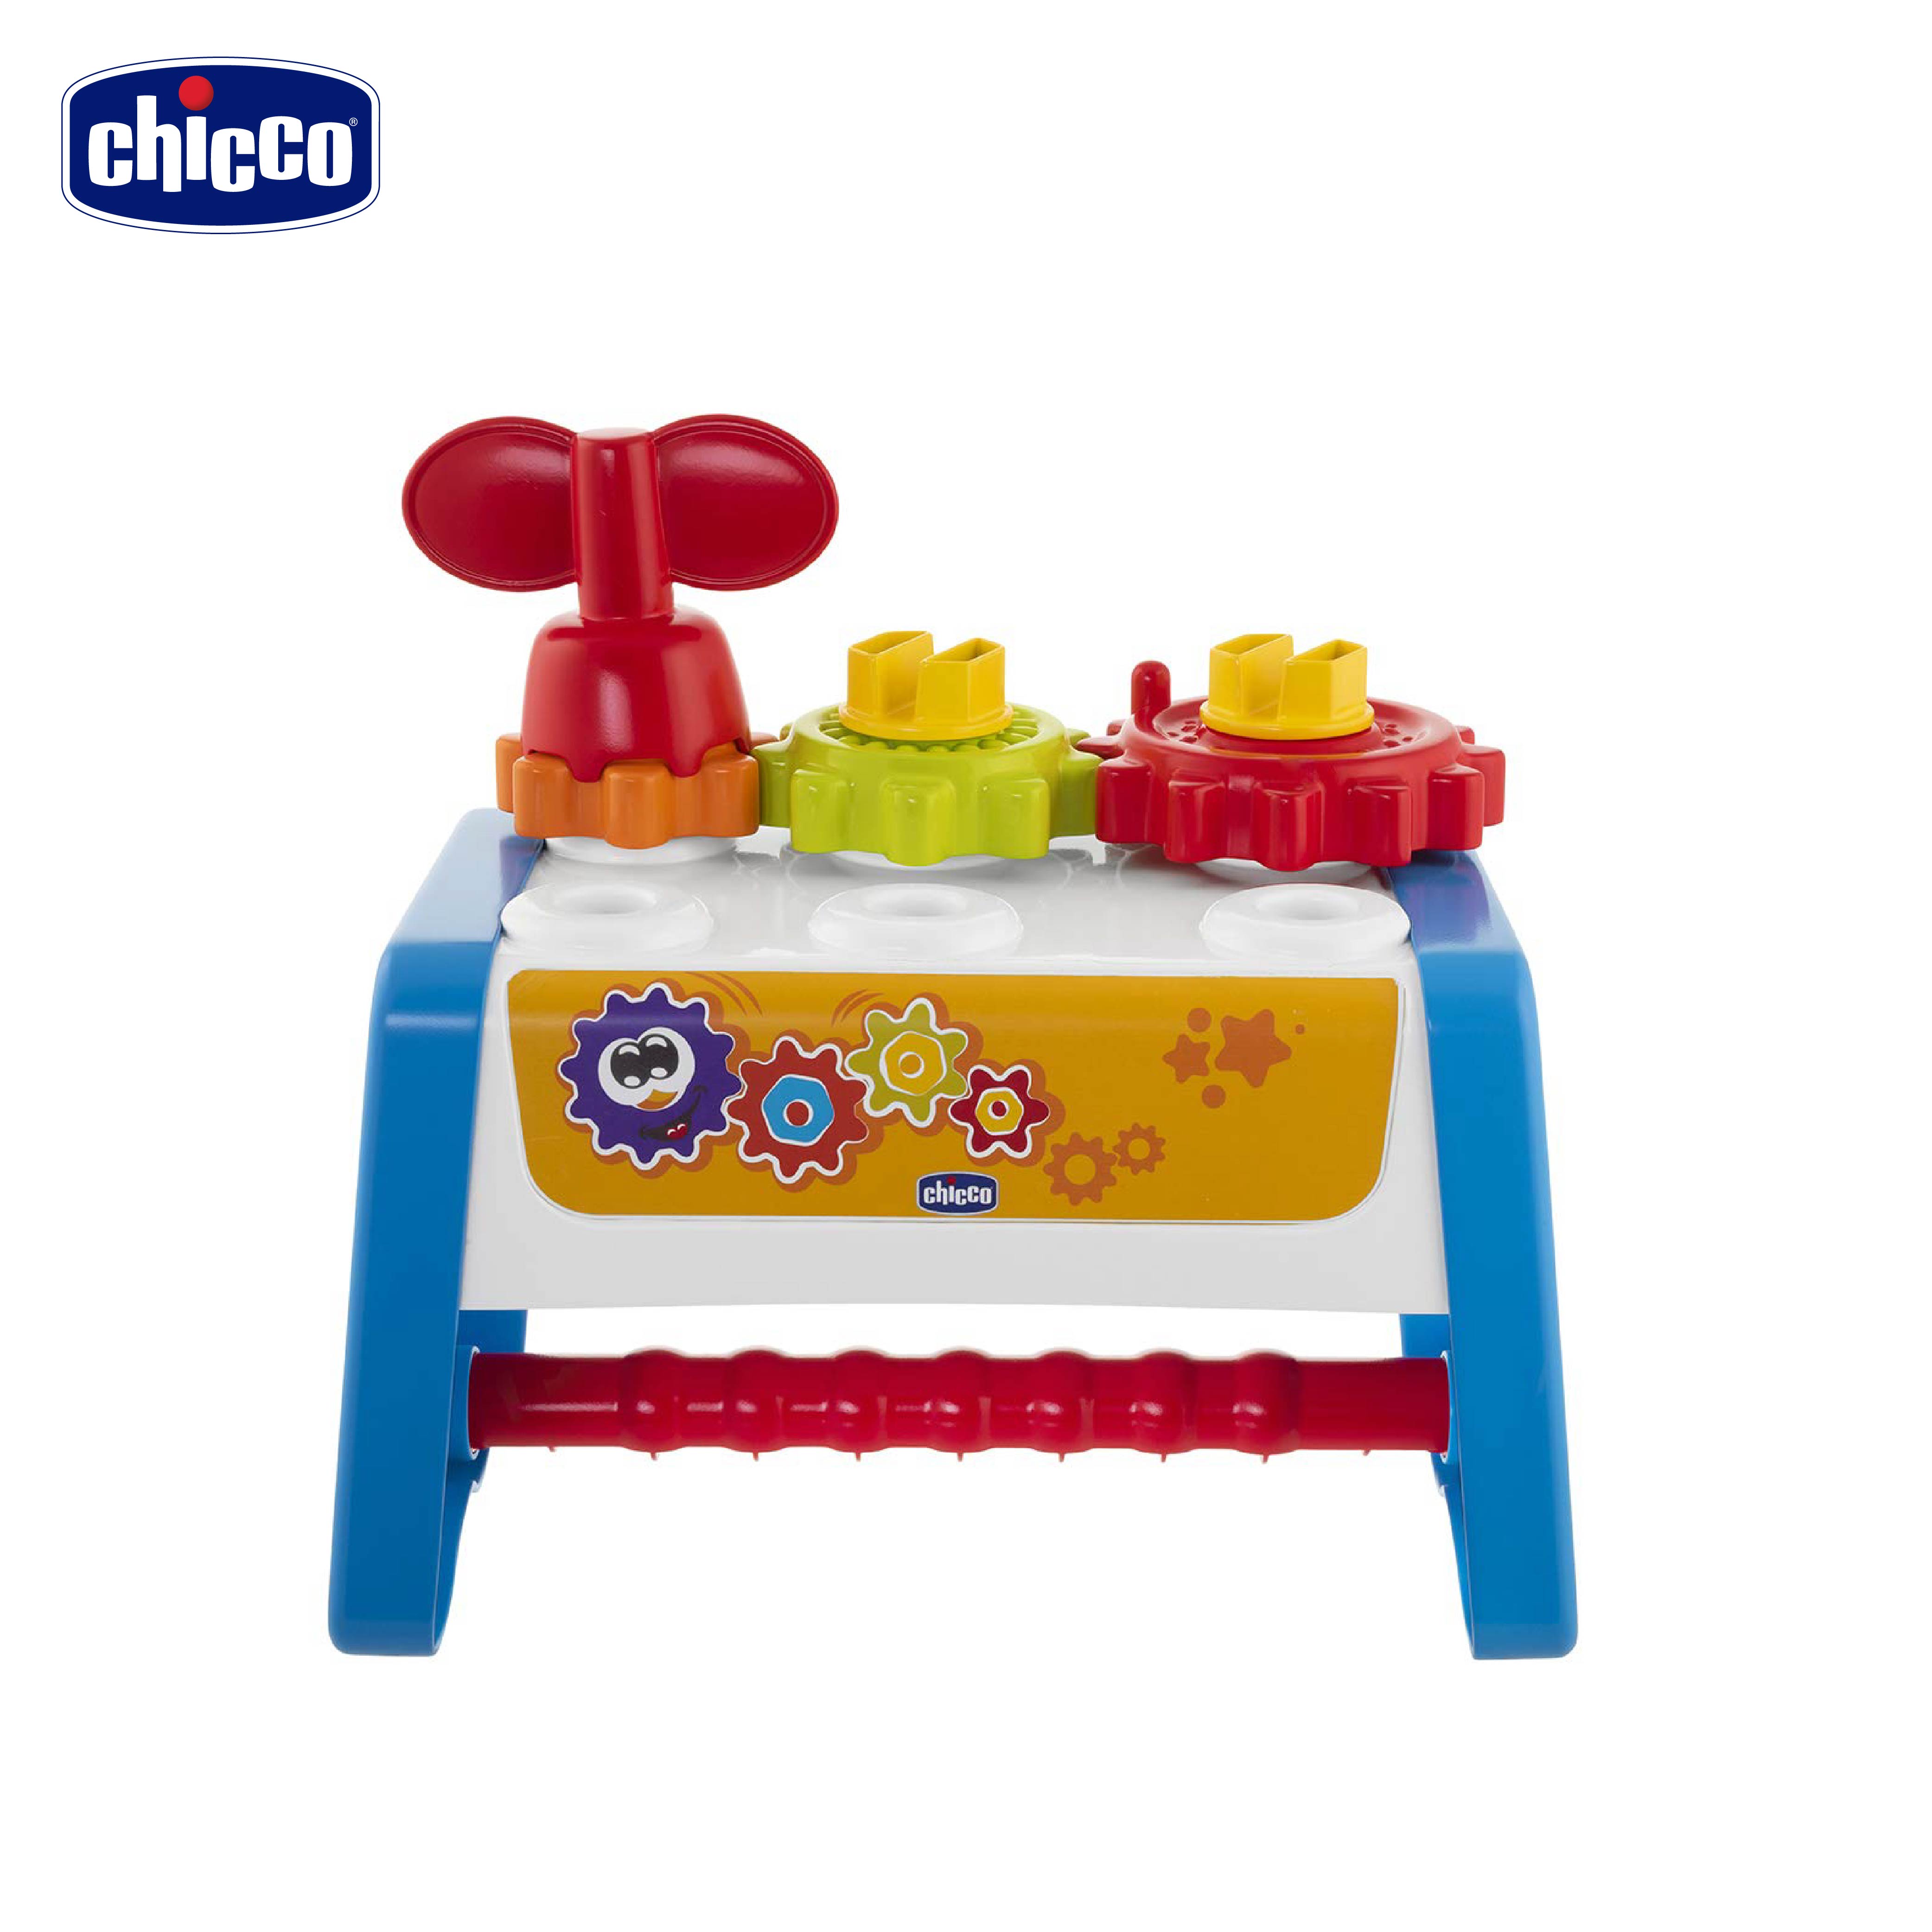 Chicco 2in1 Smart2Play Gear &amp; Workbench